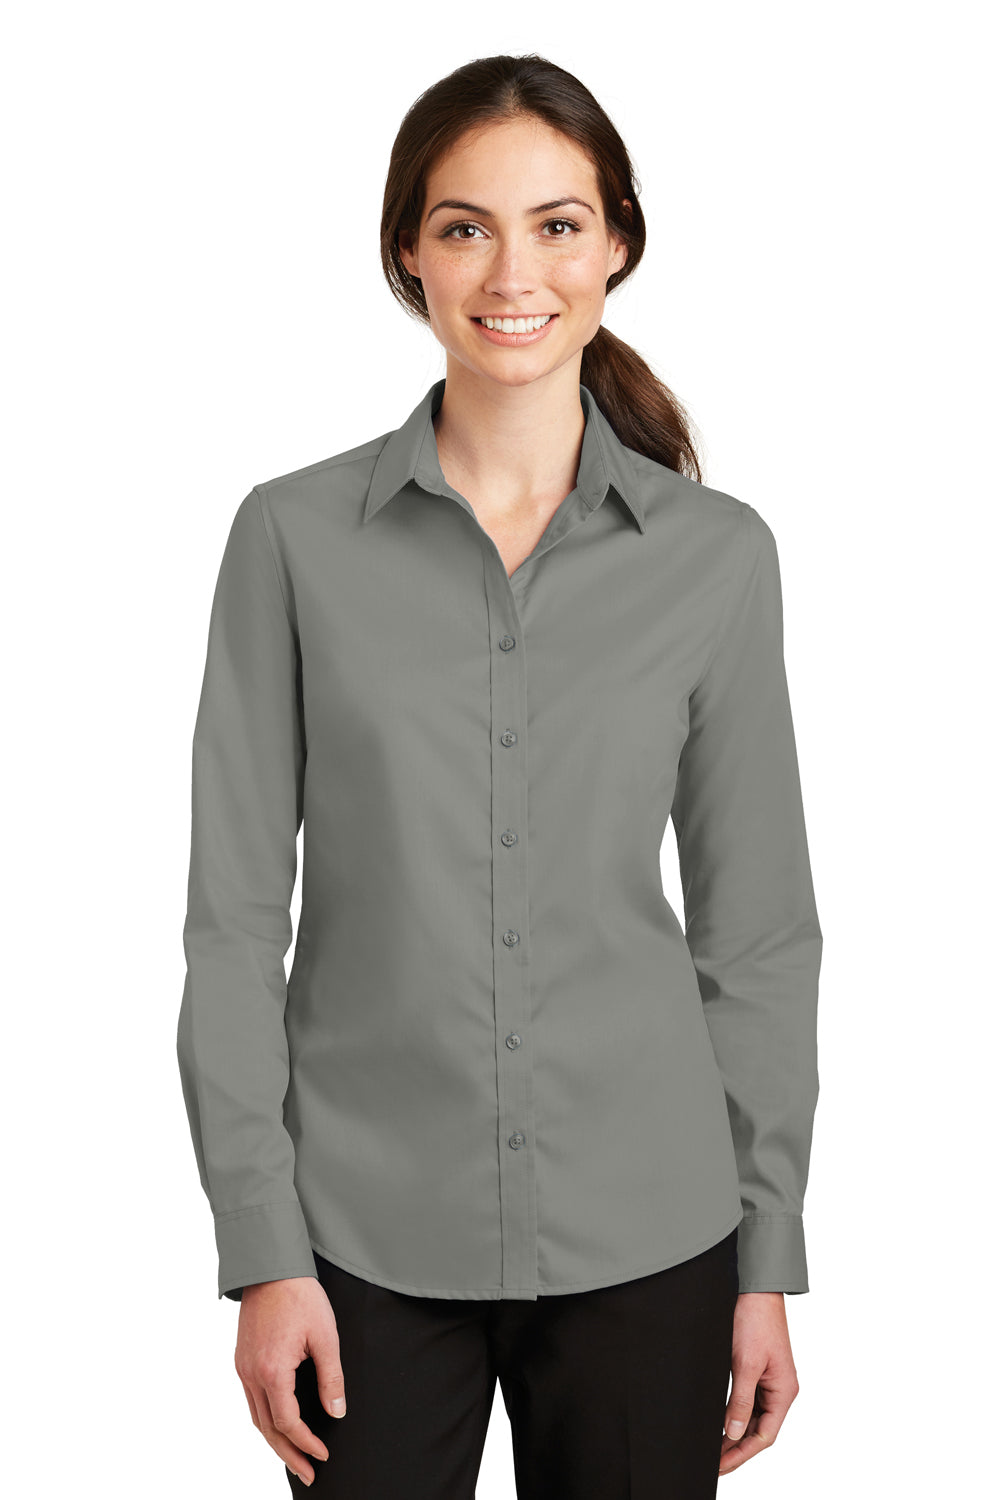 Port Authority L663 Womens SuperPro Wrinkle Resistant Long Sleeve Button Down Shirt Monument Grey Front